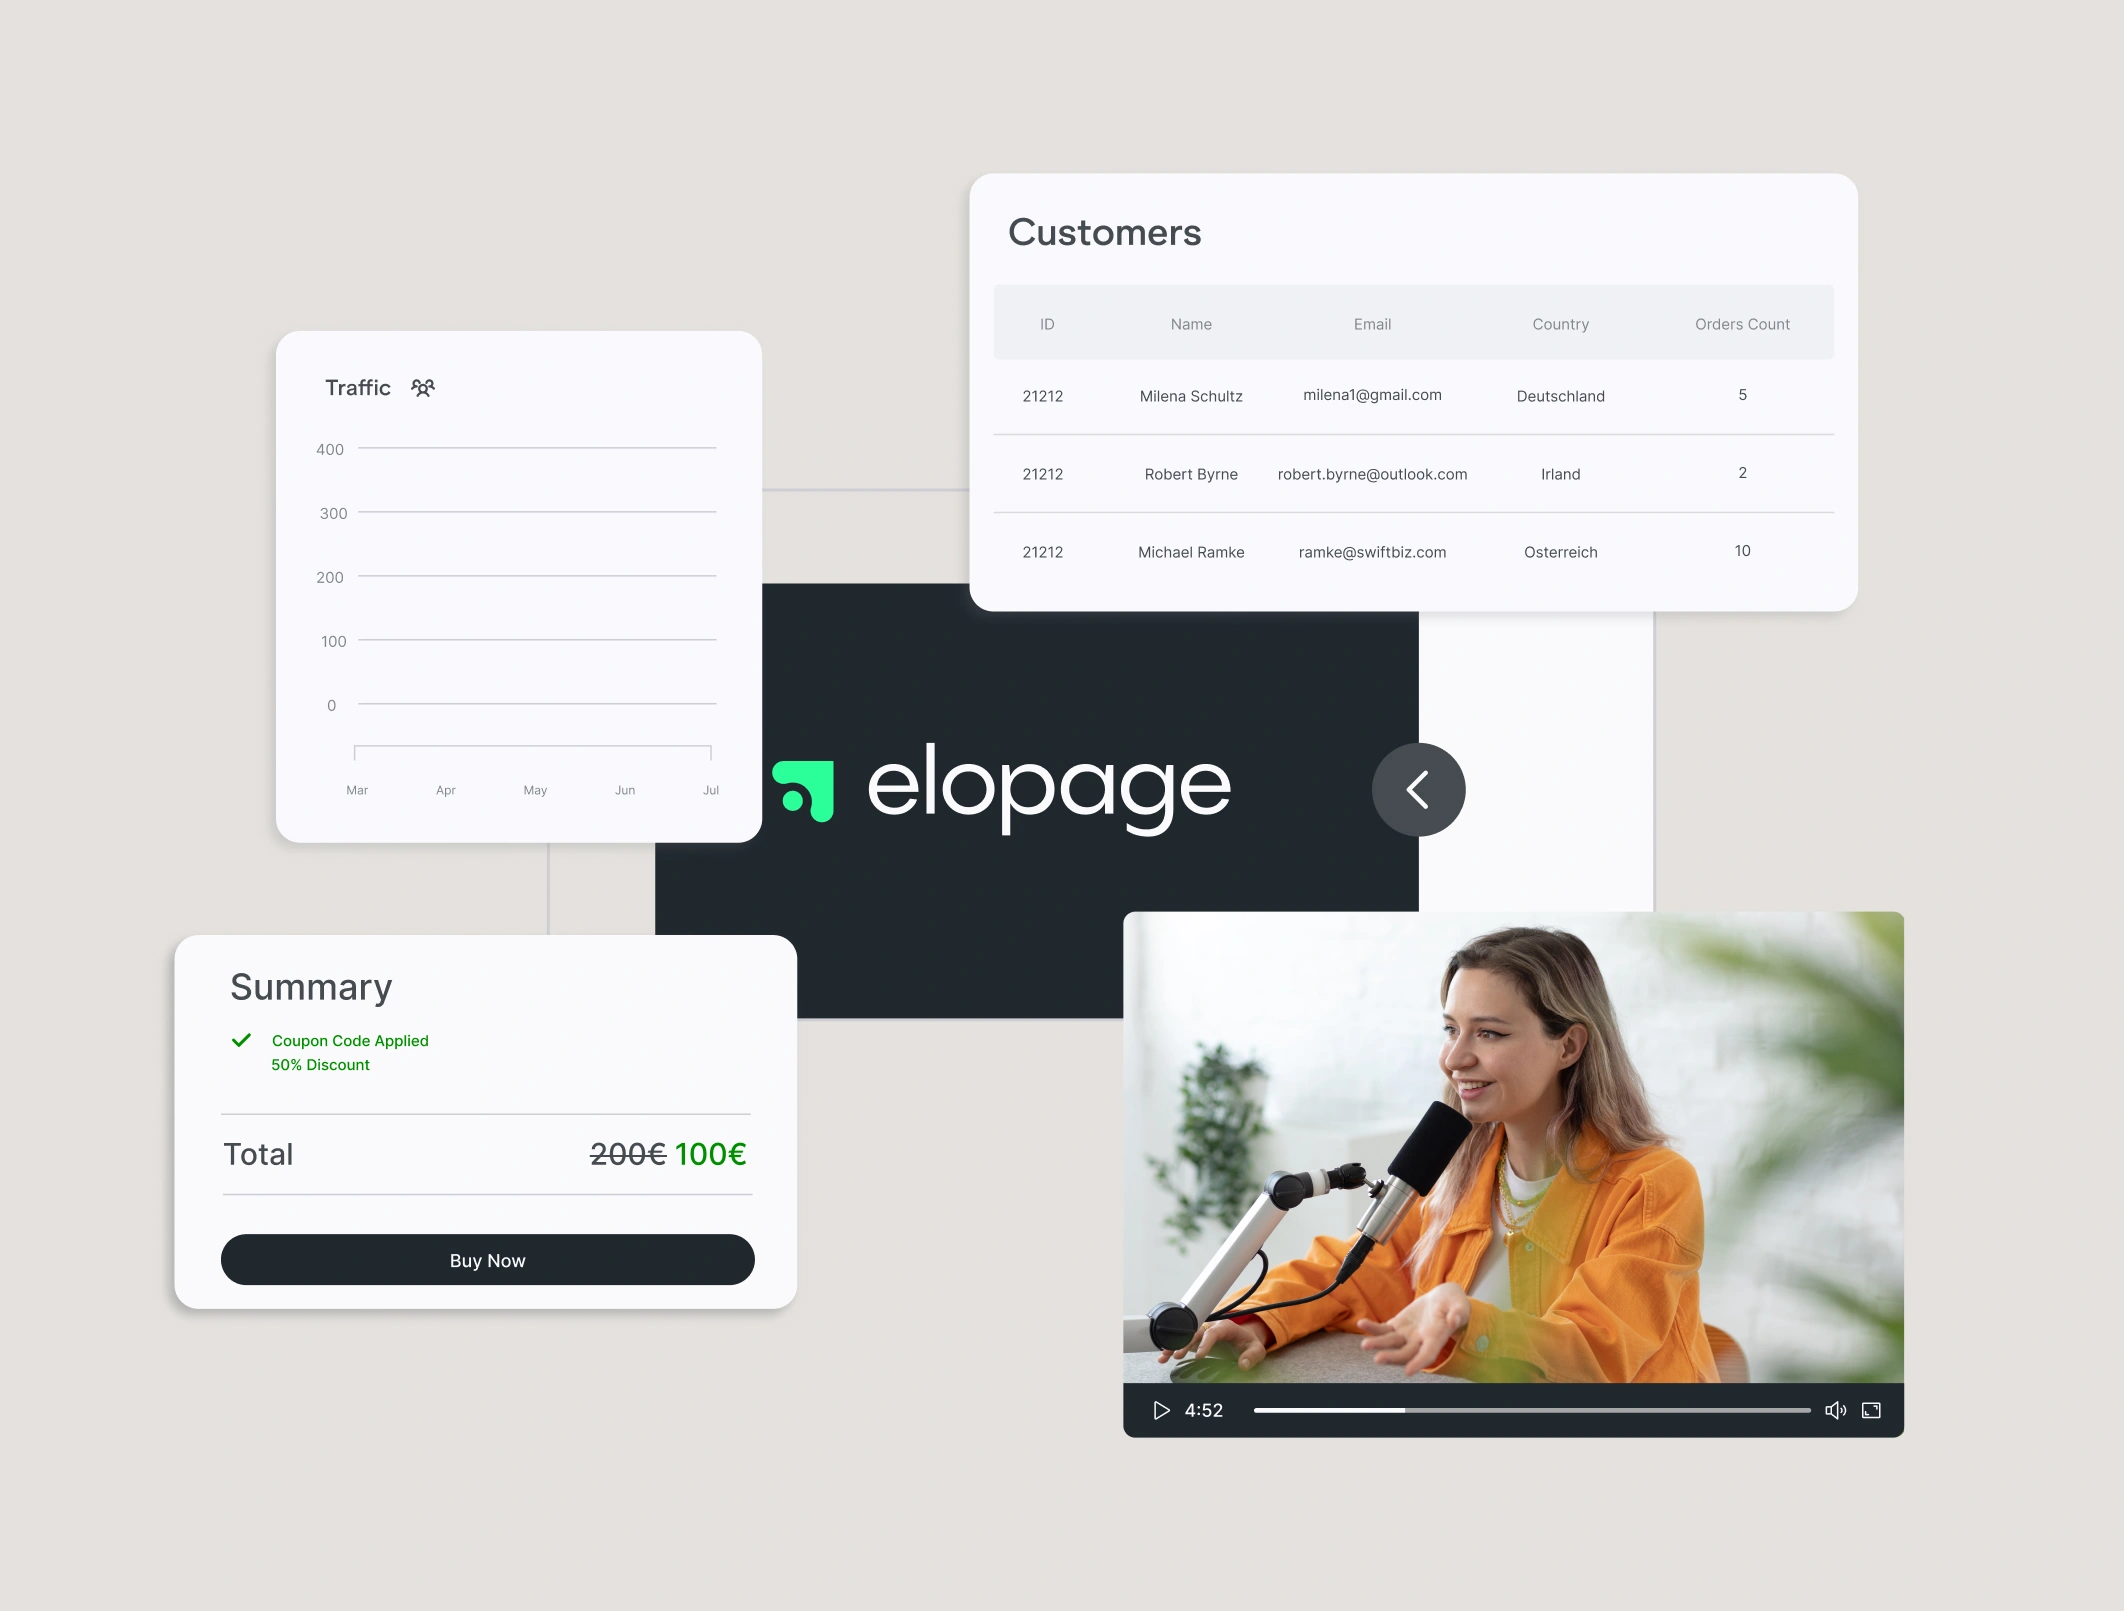 Snippets from the coaching business dashboard in elopage